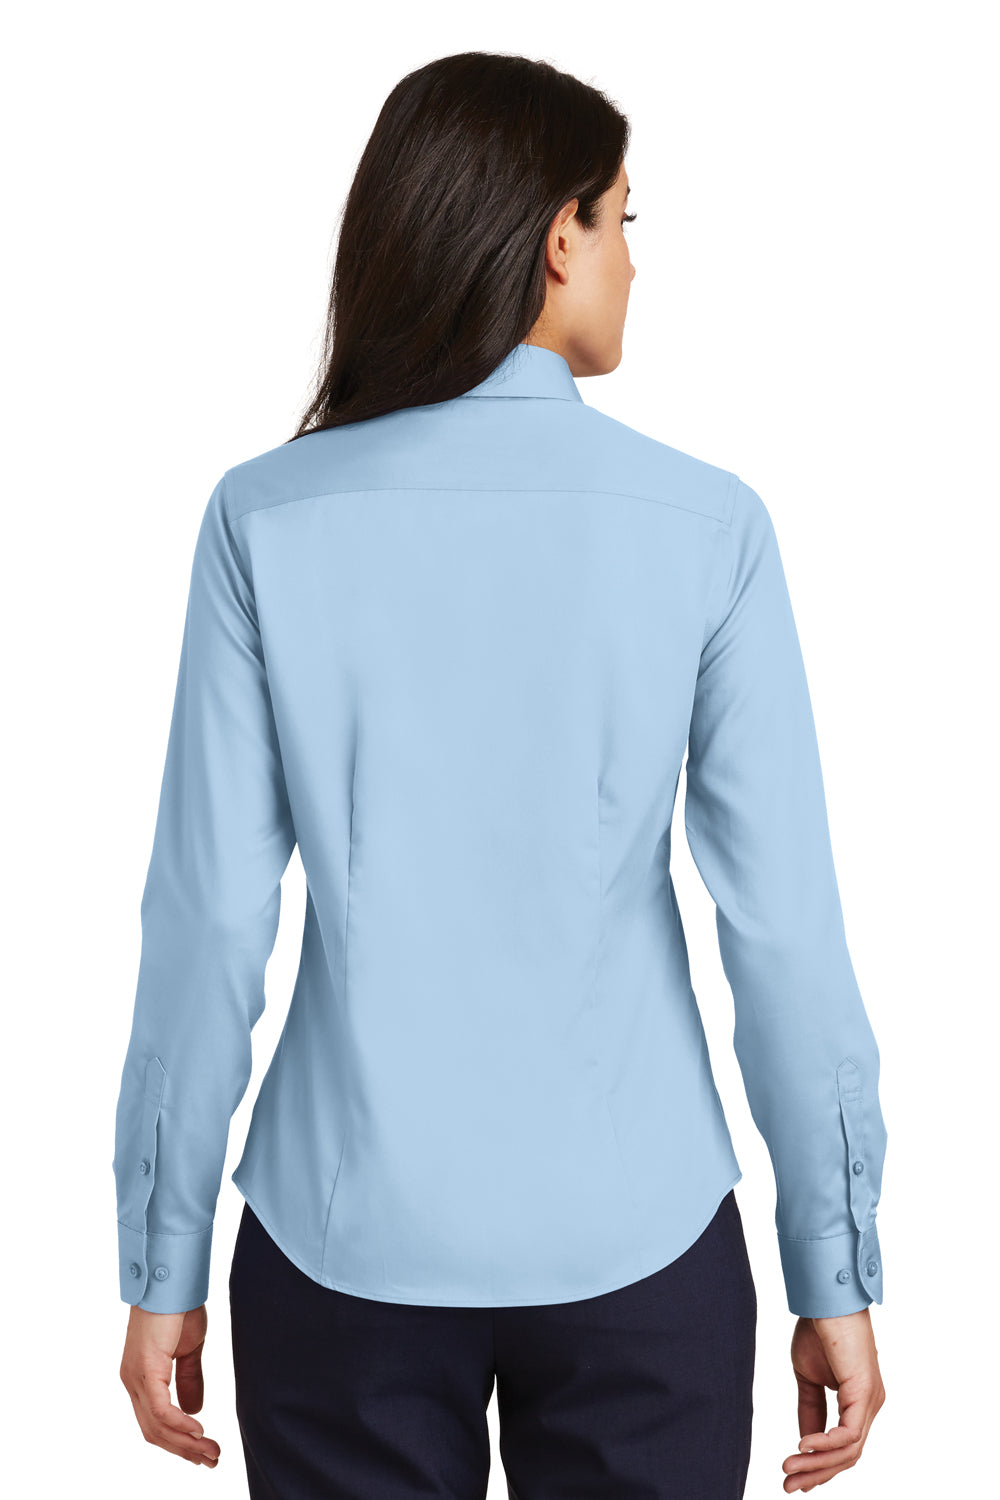 Port Authority L638 Womens Wrinkle Resistant Long Sleeve Button Down Shirt Sky Blue Back